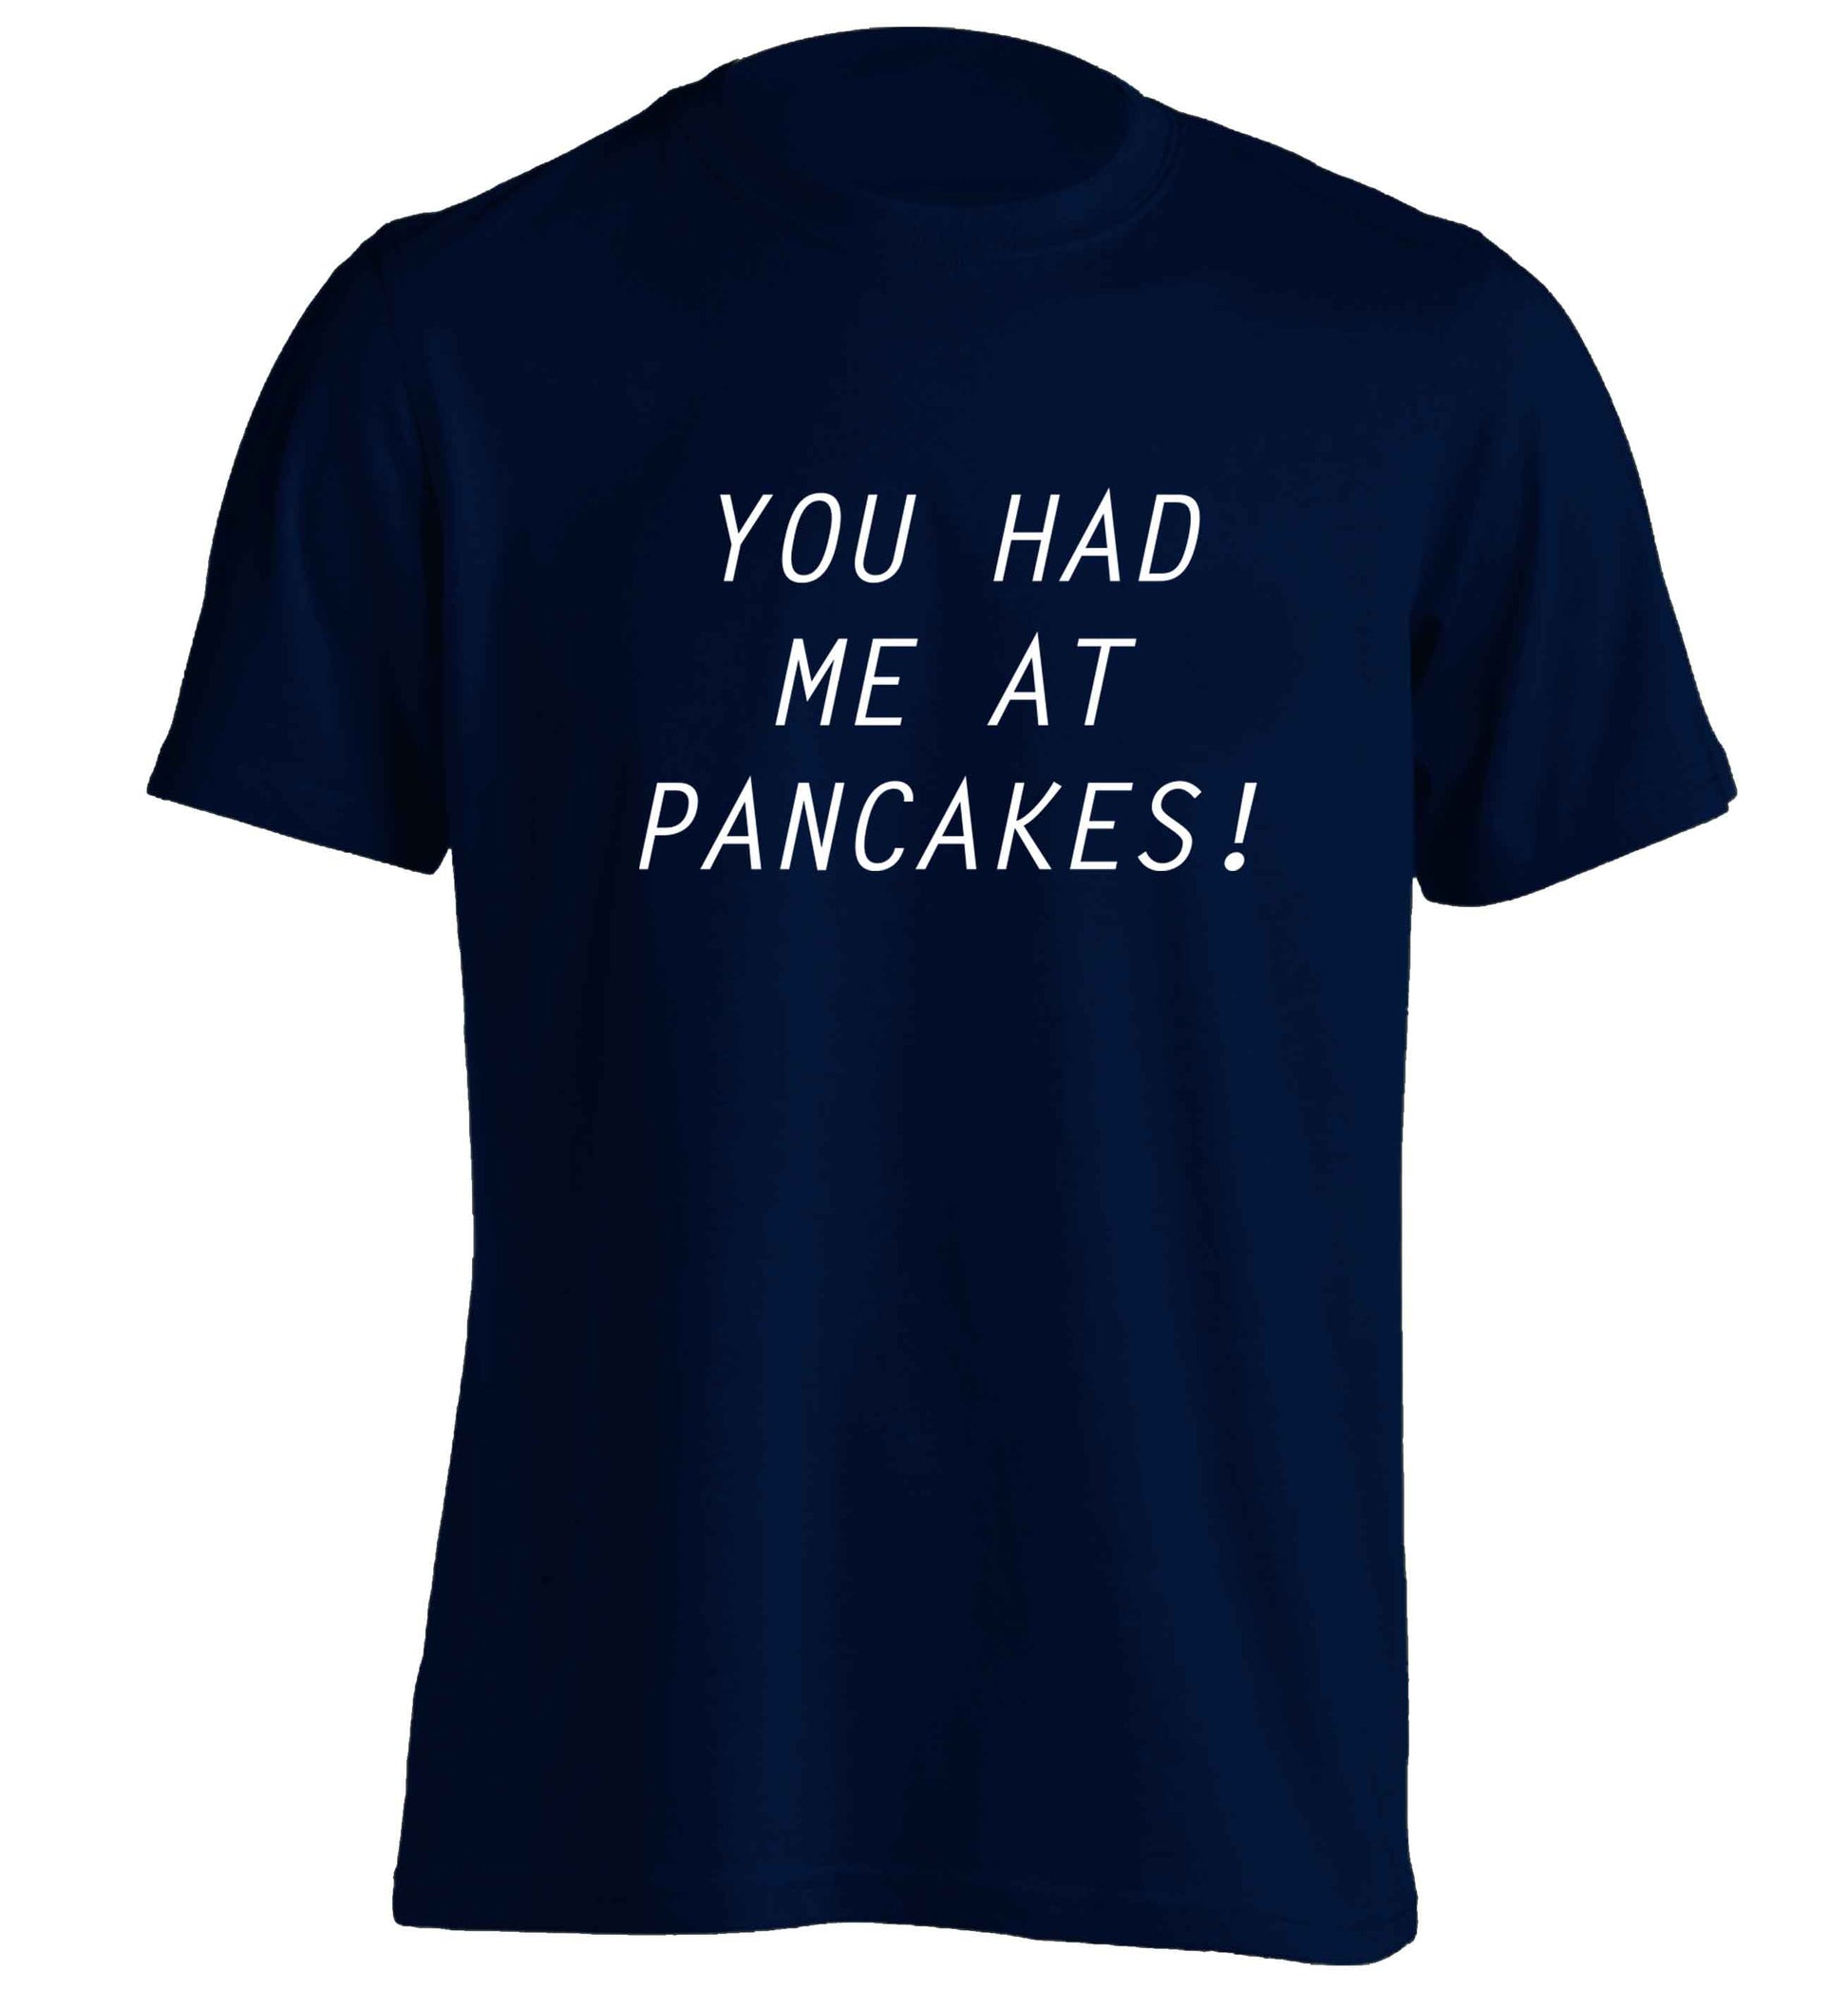 You had me at pancakes adults unisex navy Tshirt 2XL